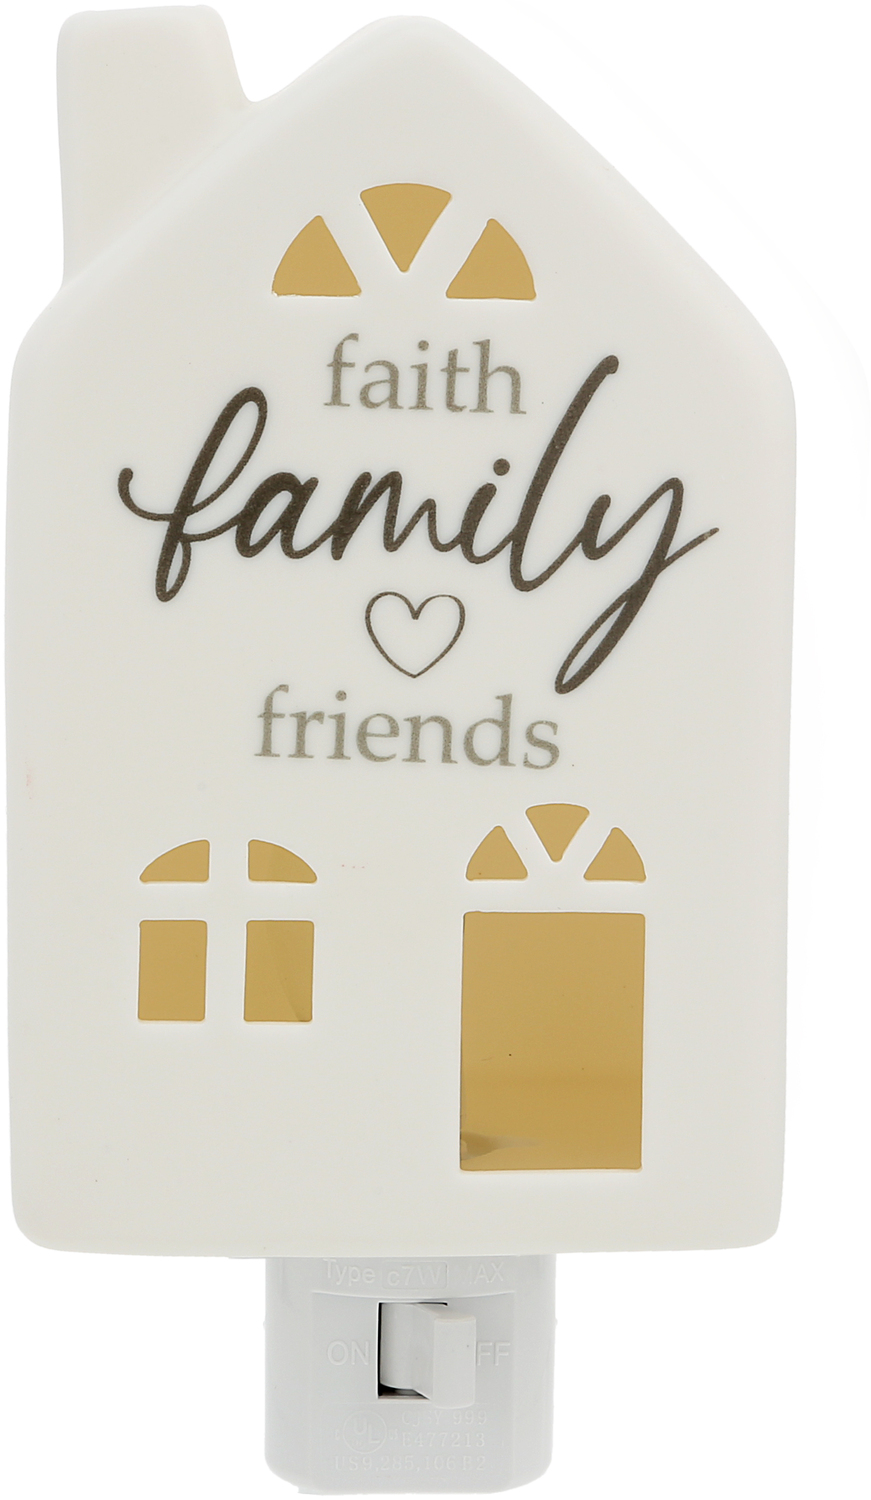 Family by Thoughts of Home - Family - 5" Ceramic Night Light